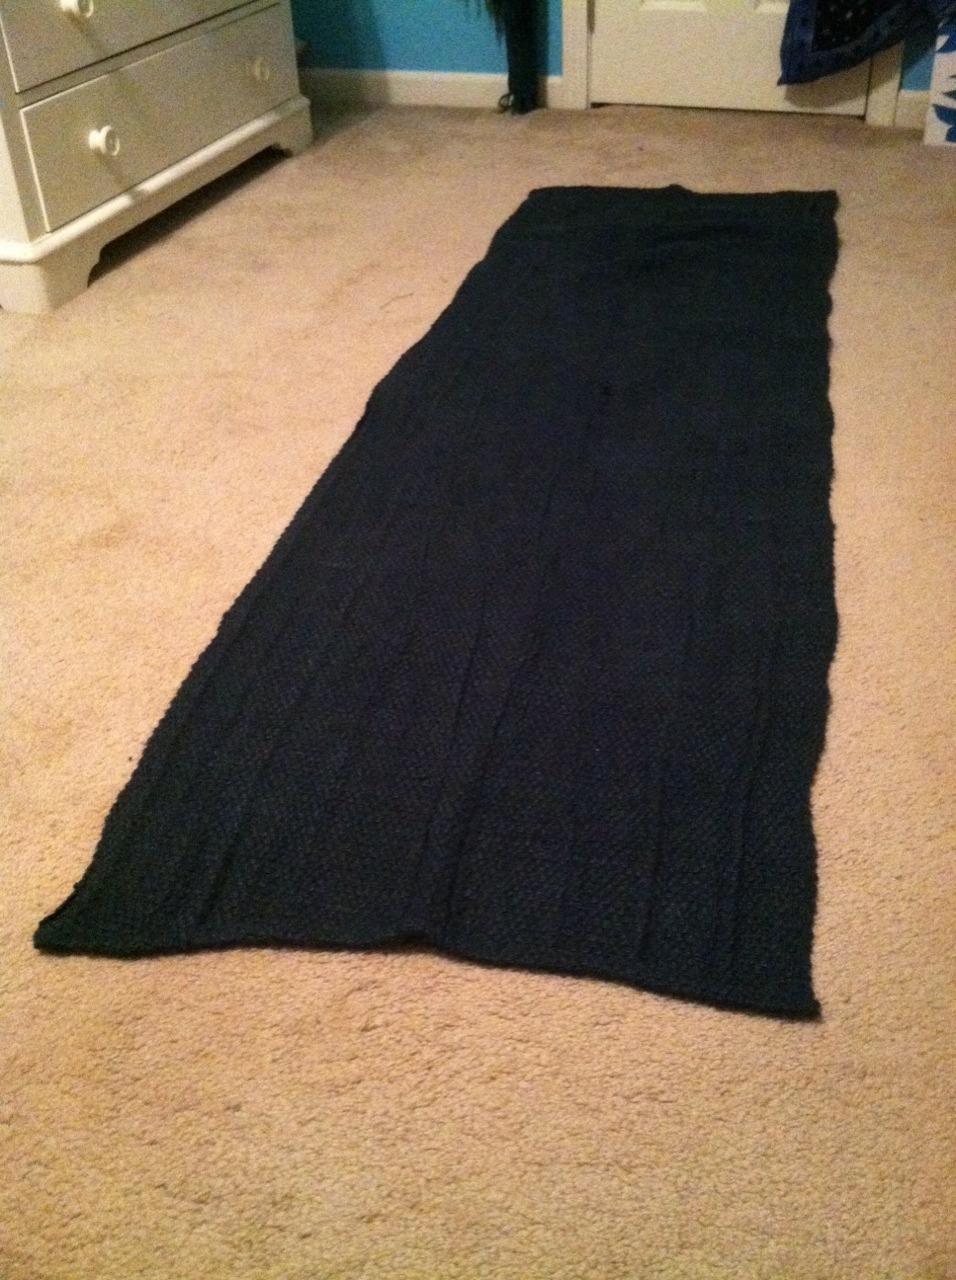 This beautiful handwoven hemp yoga mat arrived in the mail today. It looks black